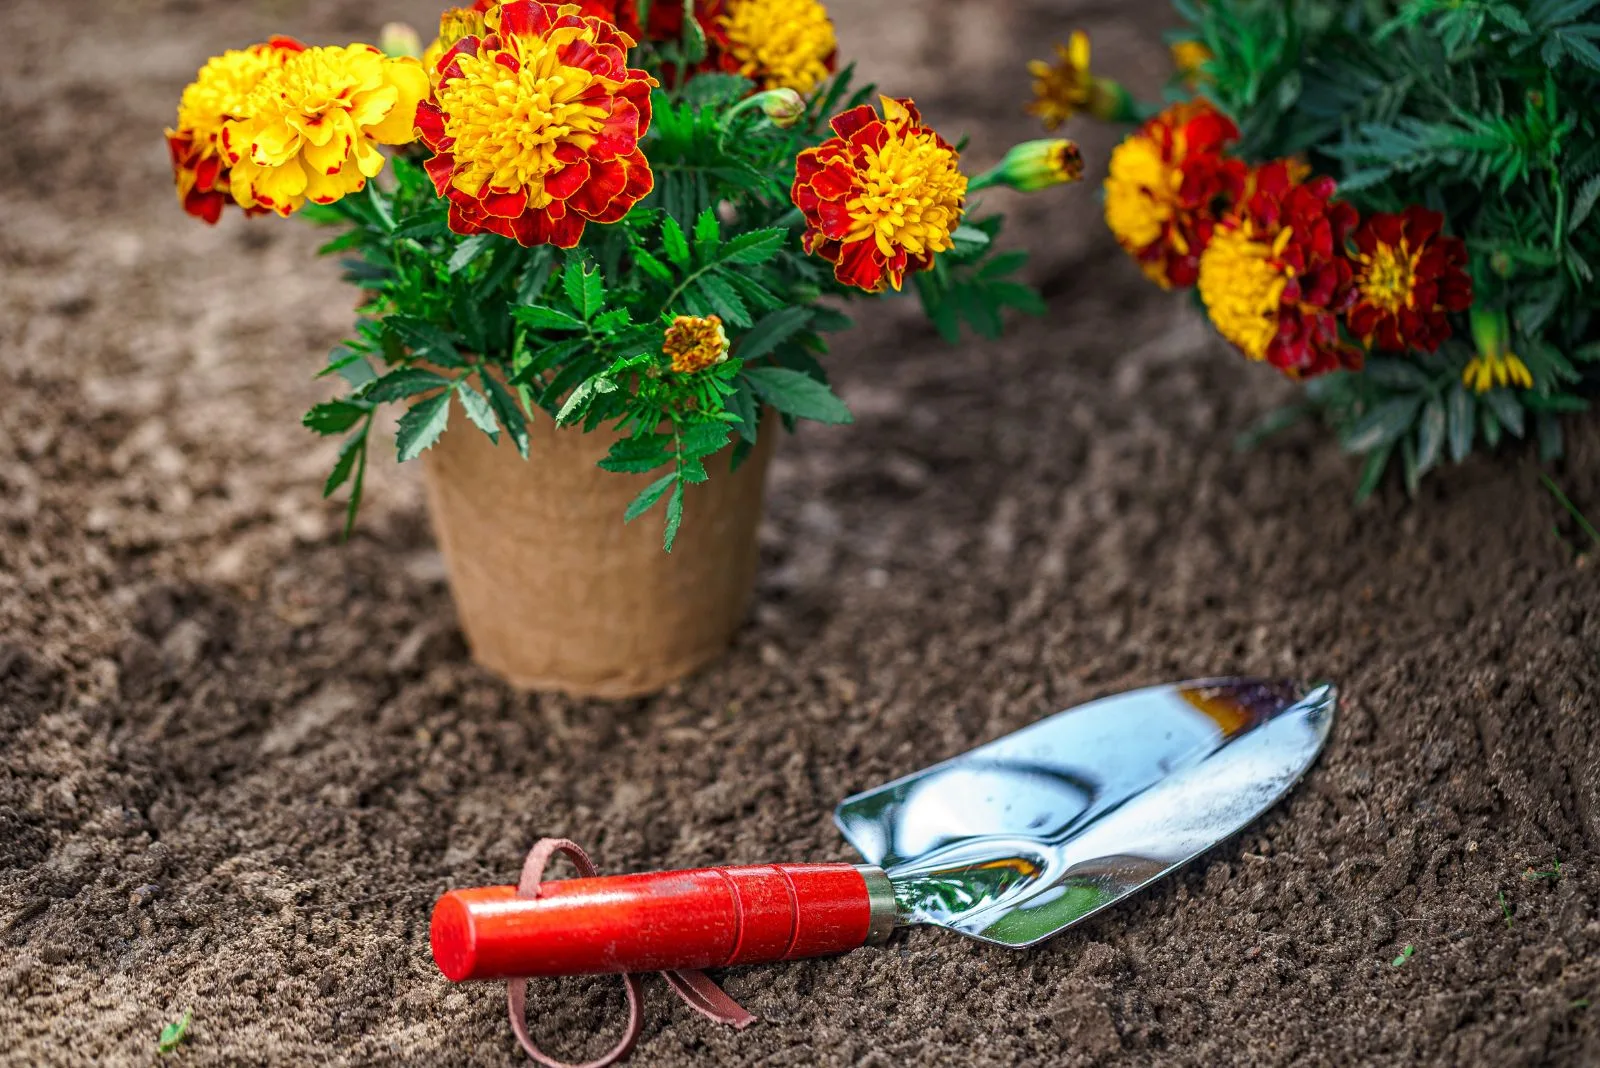 Shovel and pot with marigold flowers for planting in home garden.